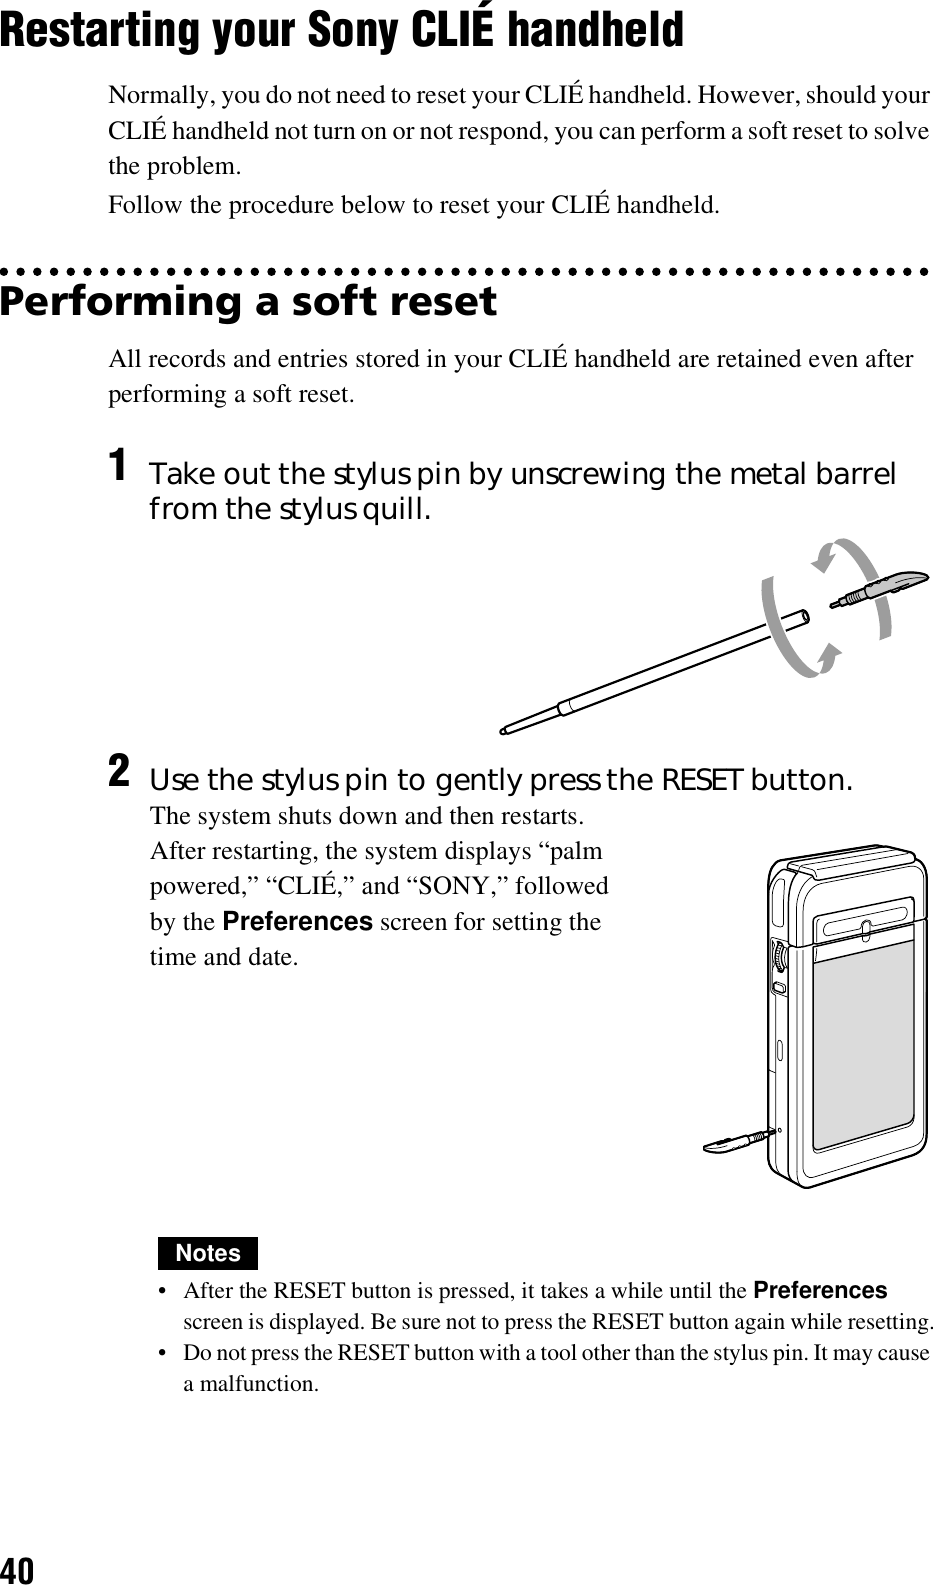 40Restarting your Sony CLIÉ handheldNormally, you do not need to reset your CLIÉ handheld. However, should your CLIÉ handheld not turn on or not respond, you can perform a soft reset to solve the problem.Follow the procedure below to reset your CLIÉ handheld.Performing a soft resetAll records and entries stored in your CLIÉ handheld are retained even after performing a soft reset.Notes• After the RESET button is pressed, it takes a while until the Preferences screen is displayed. Be sure not to press the RESET button again while resetting.• Do not press the RESET button with a tool other than the stylus pin. It may cause a malfunction.1Take out the stylus pin by unscrewing the metal barrel from the stylus quill.2Use the stylus pin to gently press the RESET button.The system shuts down and then restarts.After restarting, the system displays “palm powered,” “CLIÉ,” and “SONY,” followed by the Preferences screen for setting the time and date.